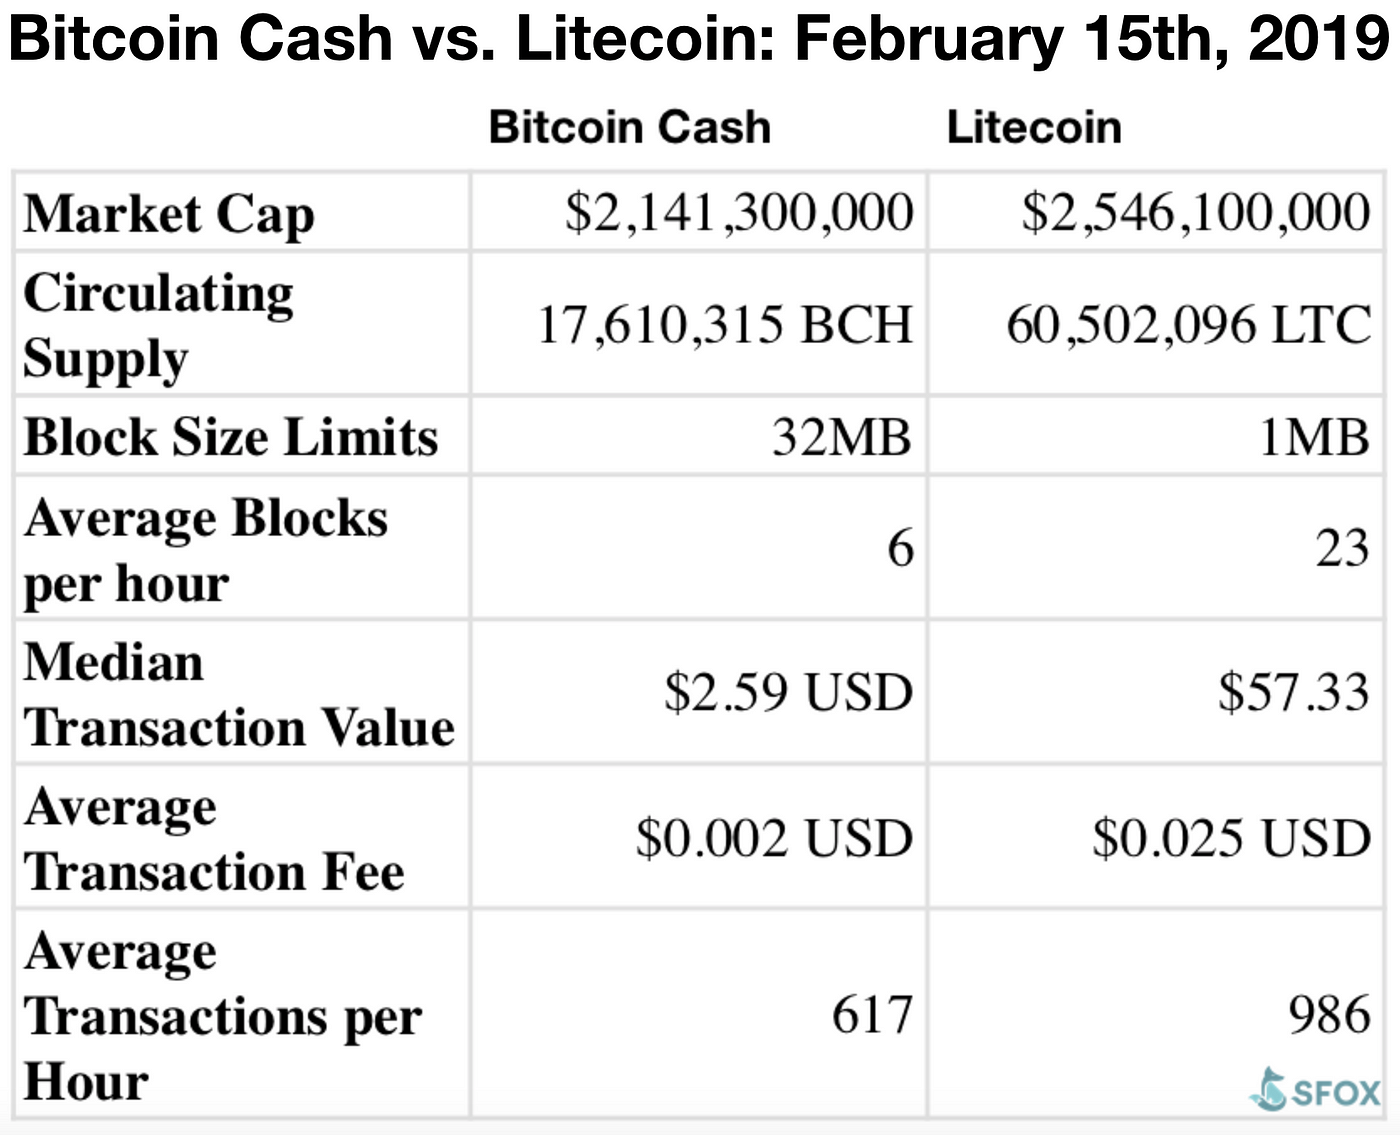 Bitcoin Cash Vs Litecoin The Fight For Electronic Cash - 